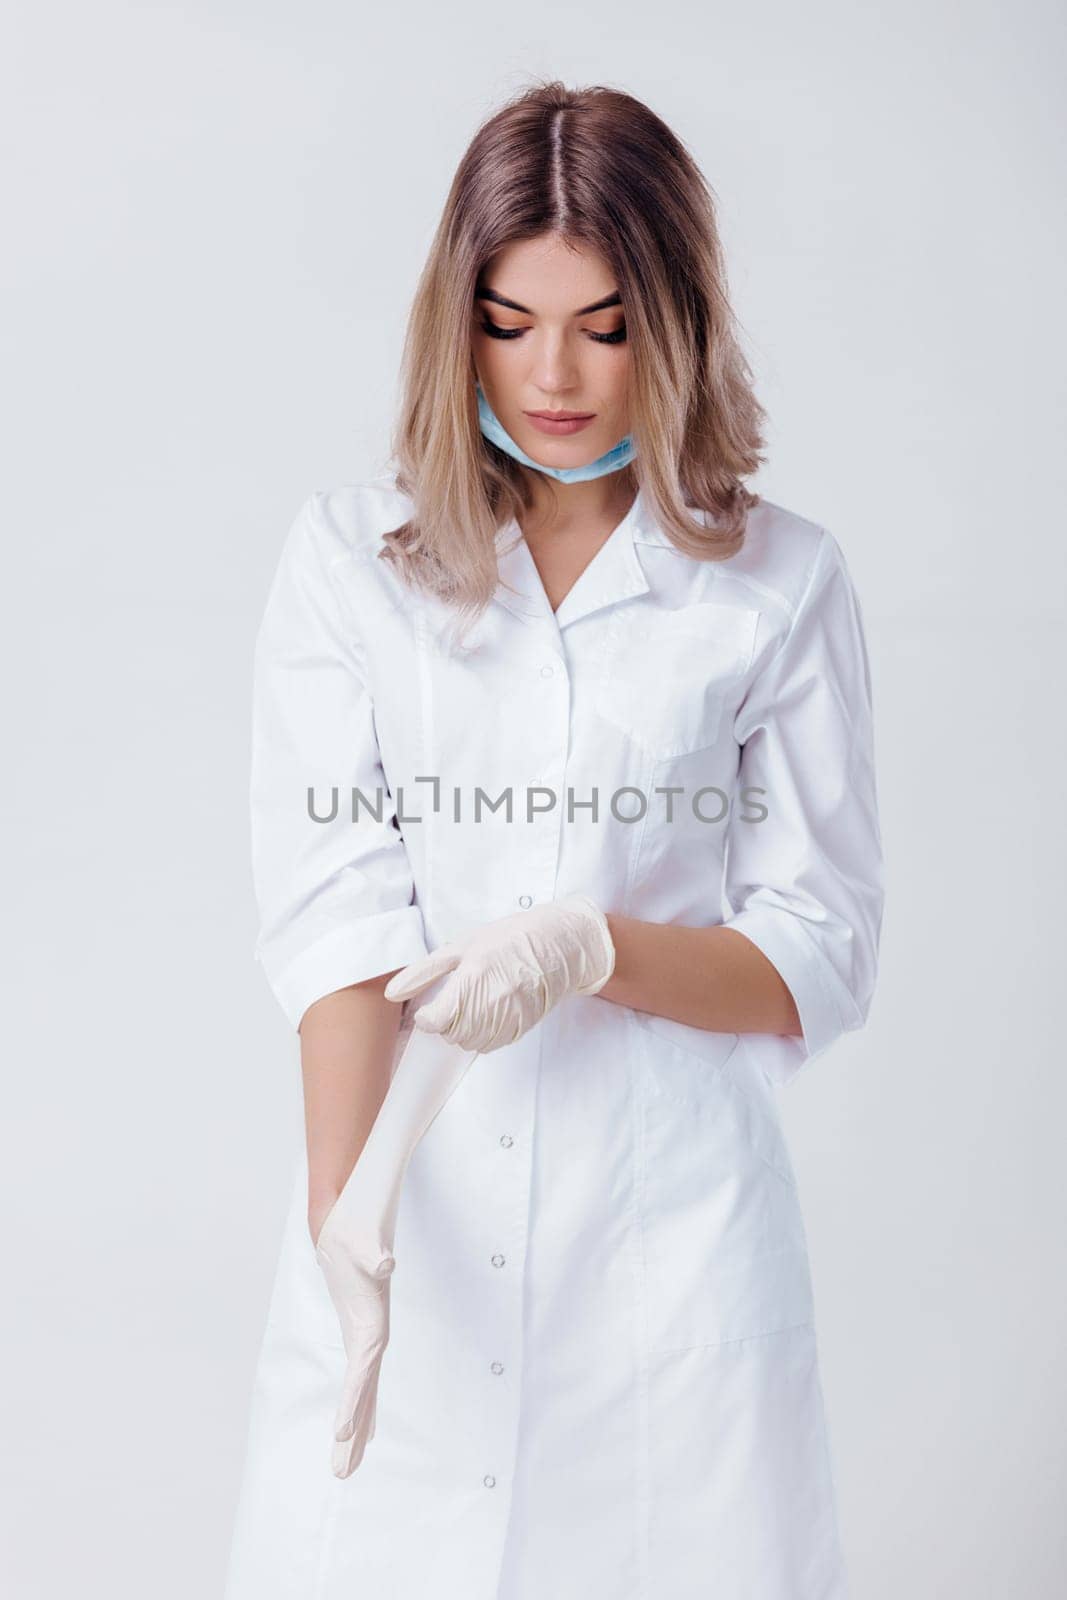 woman doctor with face mask and medical gloves by erstudio